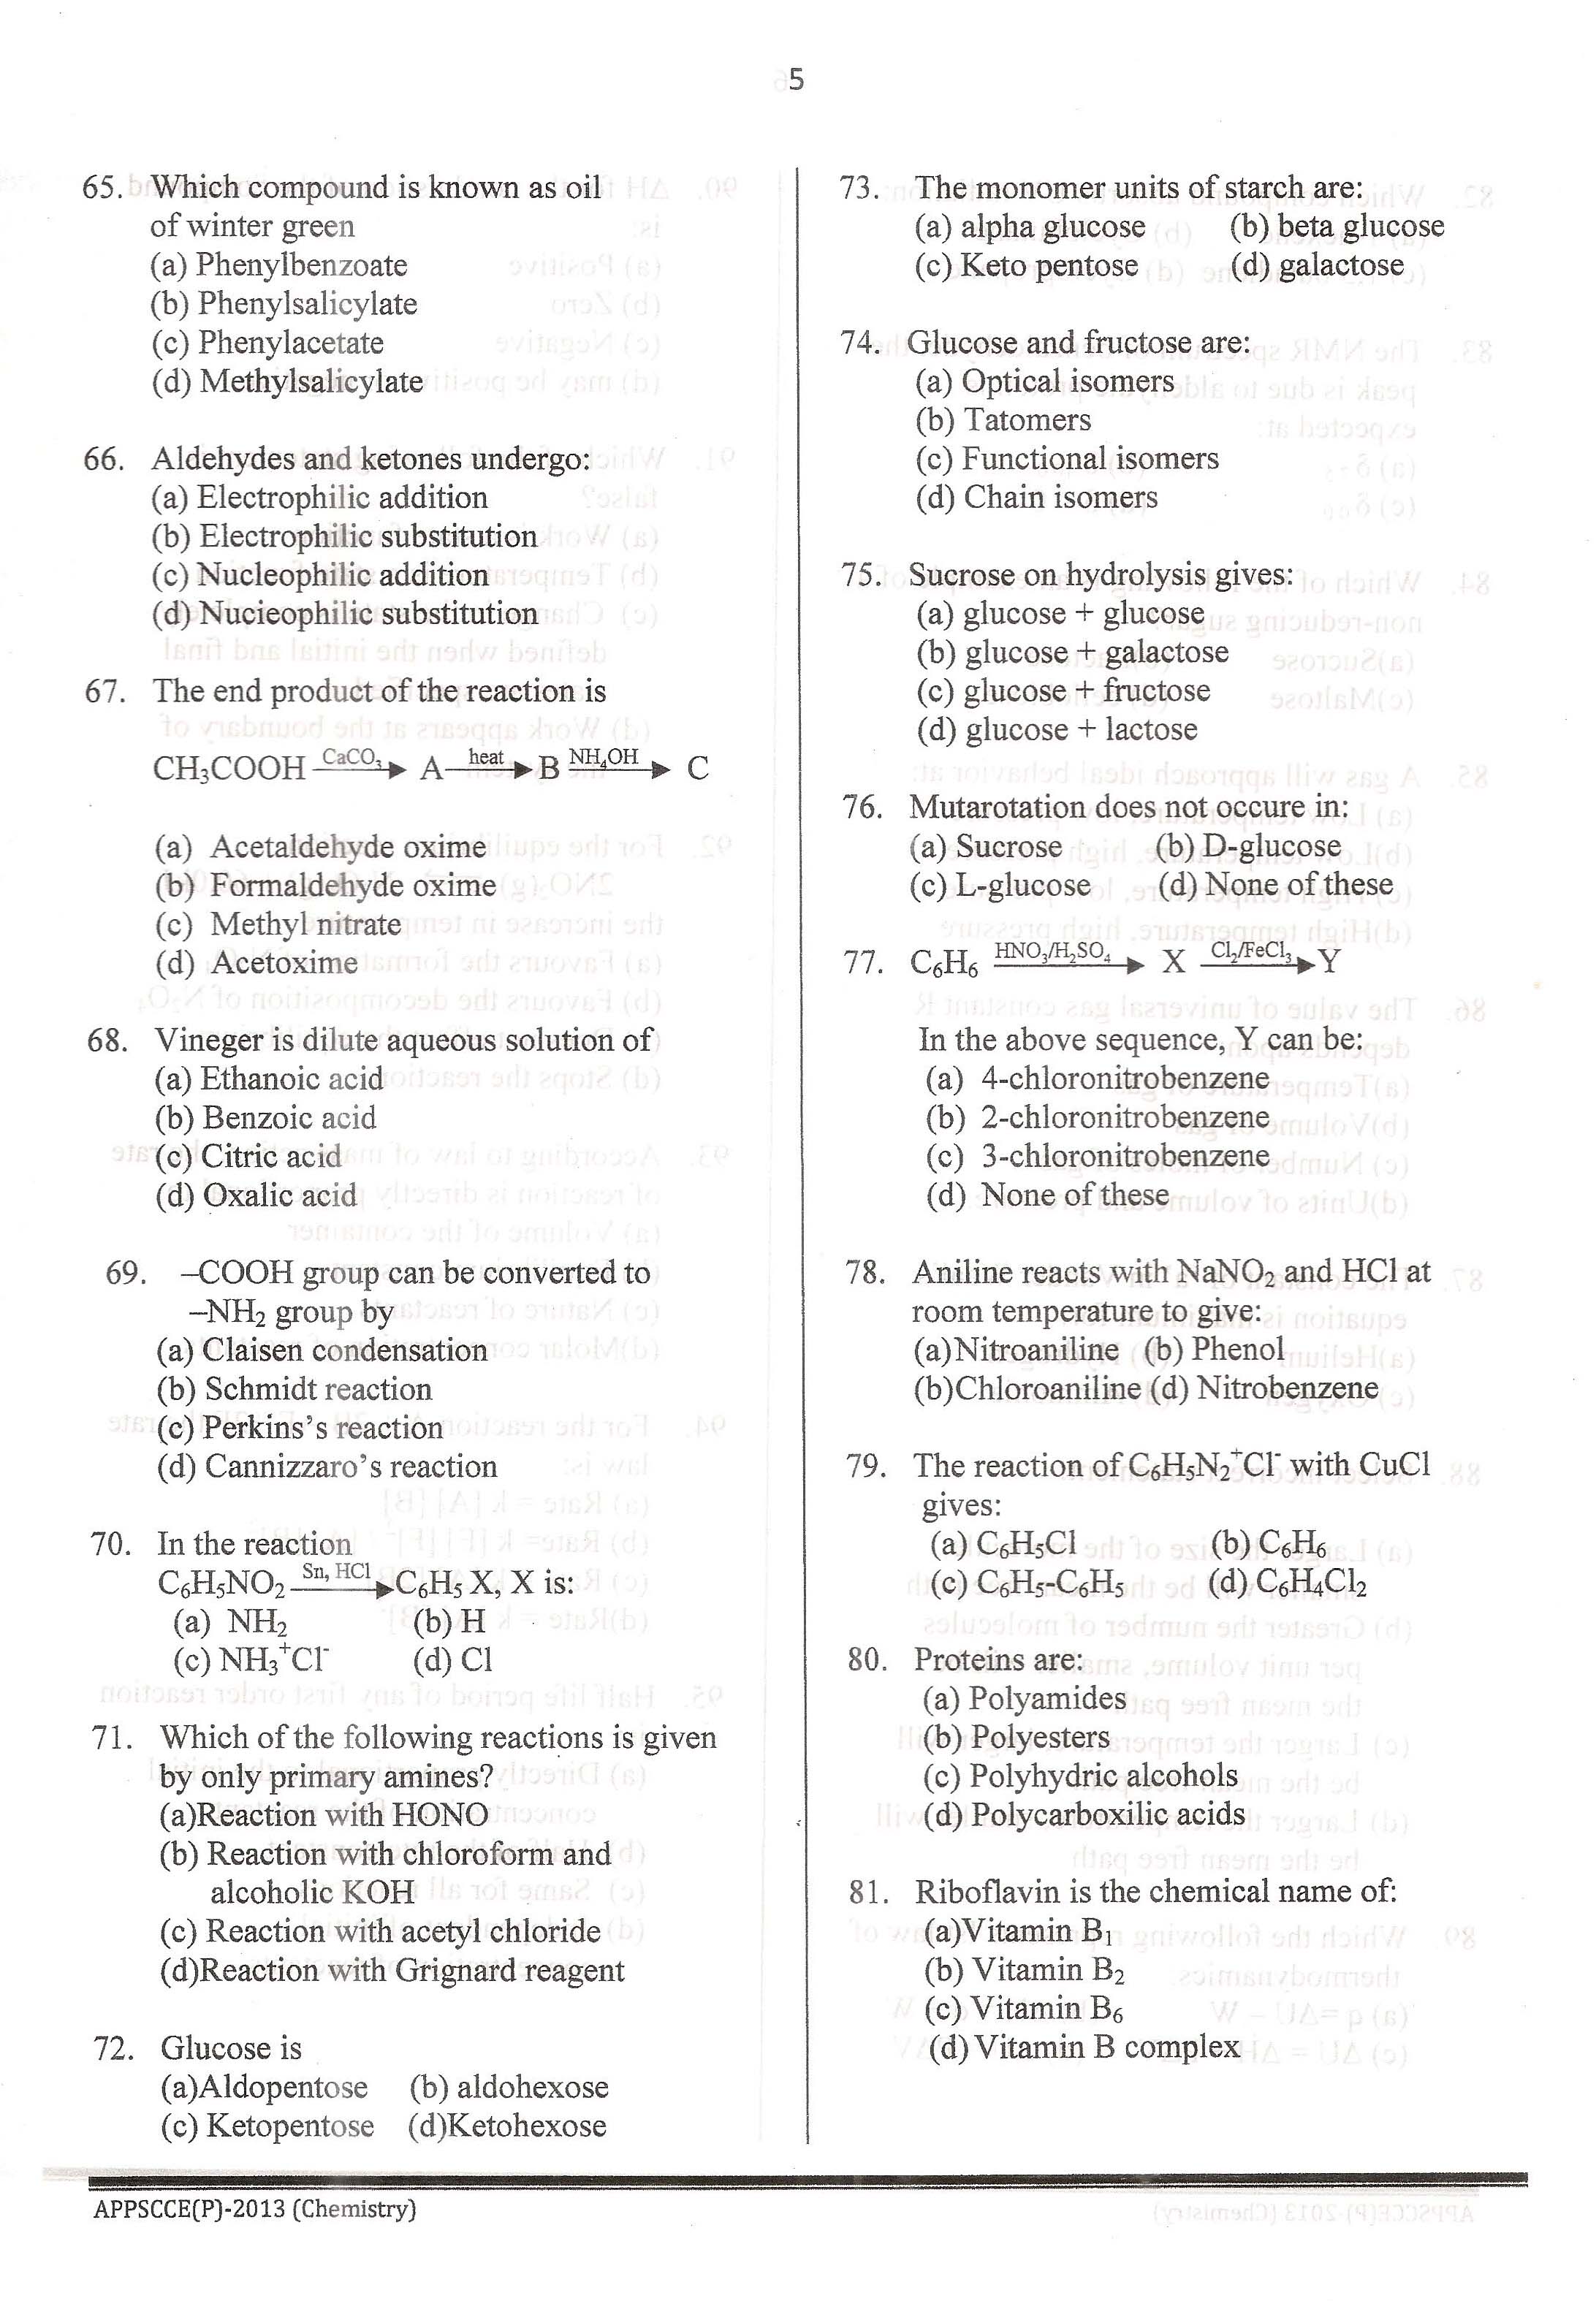 APPSC Combined Competitive Prelims Exam 2013 Chemistry 6